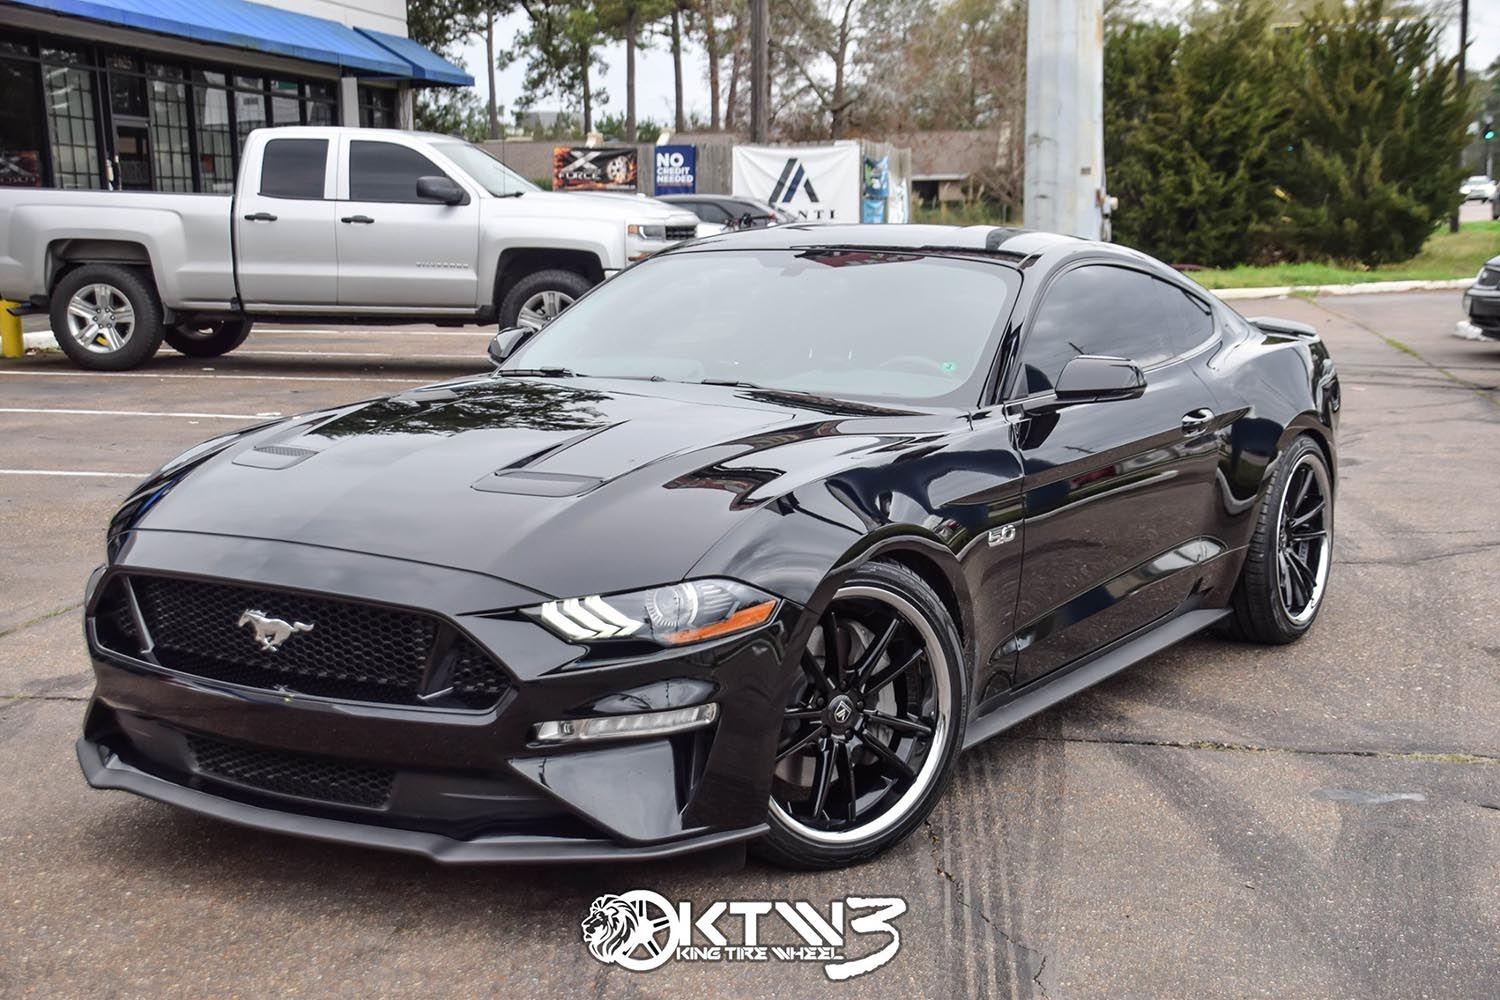 Wheel Front | Aftermarket Wheels Gallery - Ford Mustang